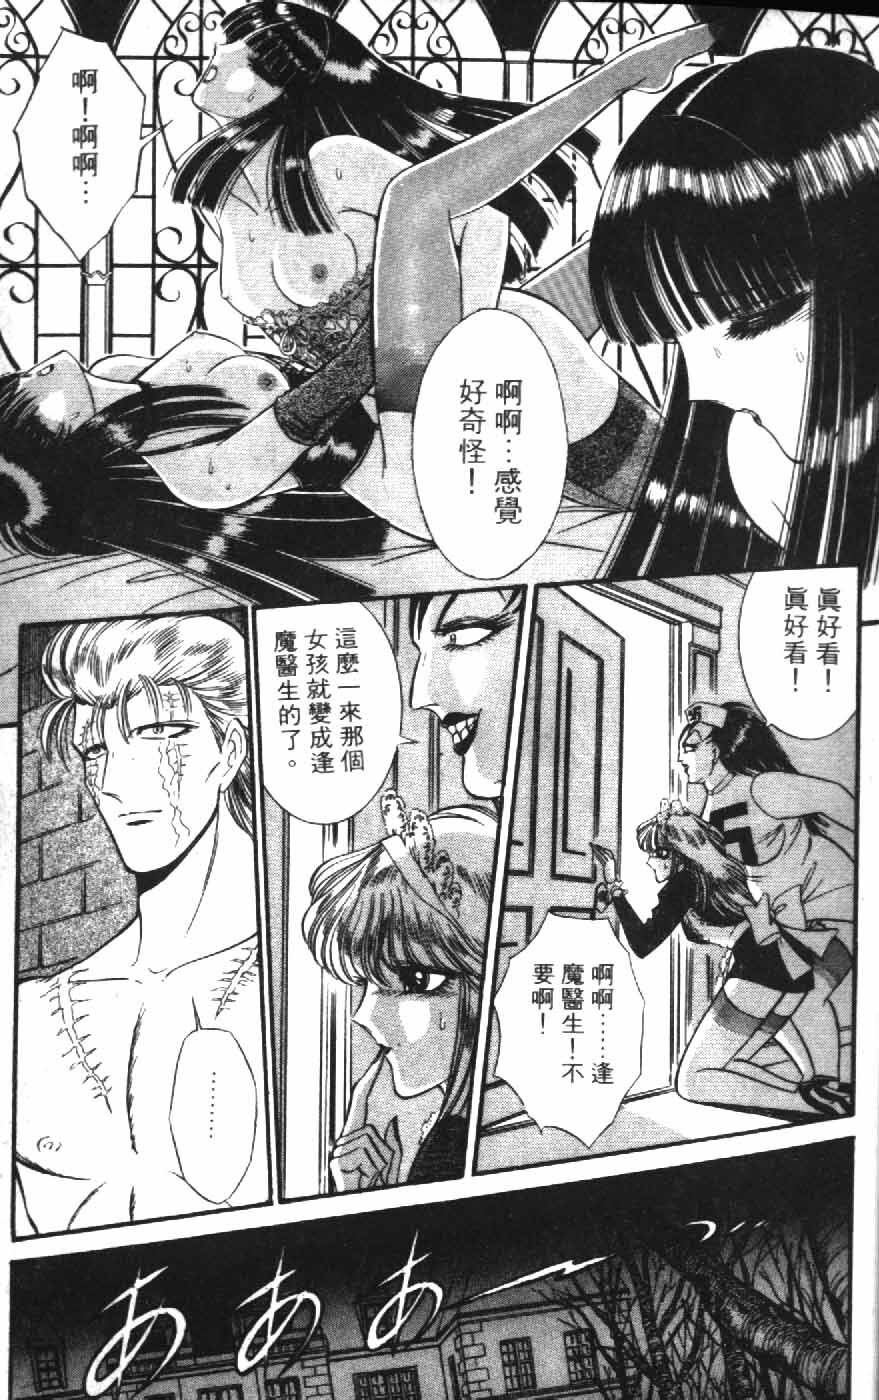 [Senno Knife] Ouma ga Horror Show 1 - Trans Sexual Special Show 1 | 顫慄博覽會 1 [Chinese] page 21 full